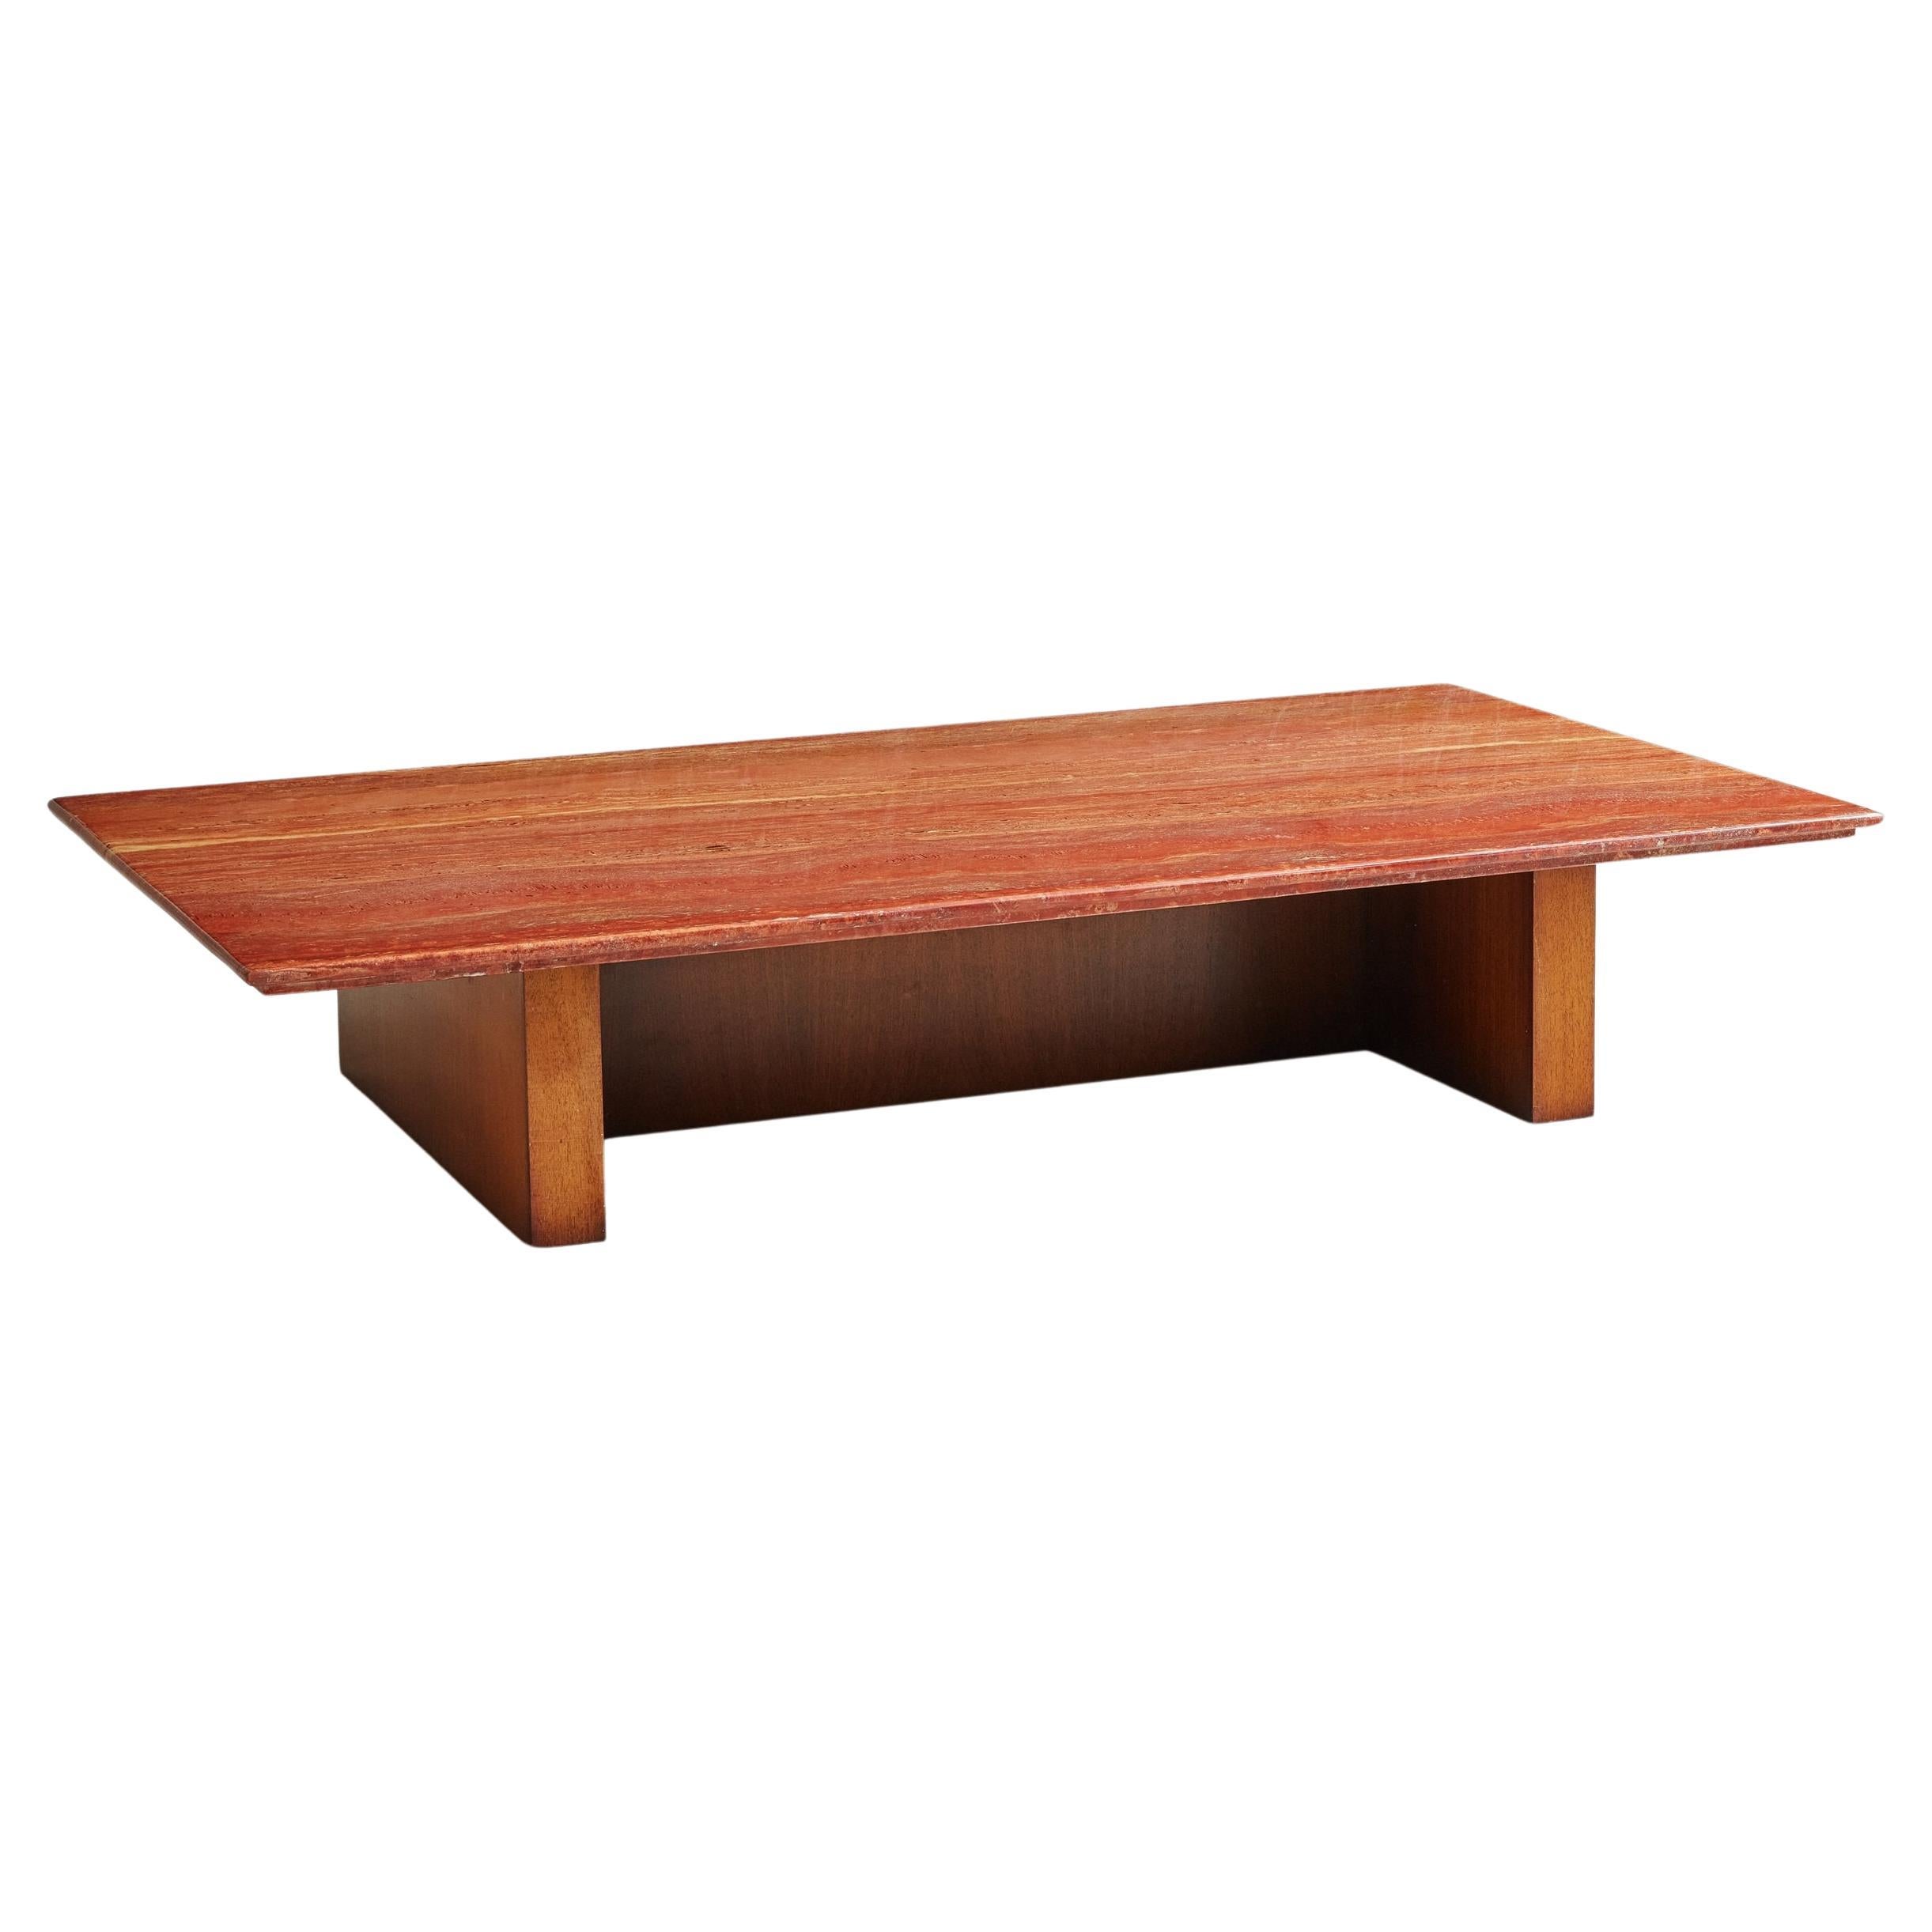 Modern Red Travertine Coffee Table with Wood Base, Belgium 1970s For Sale